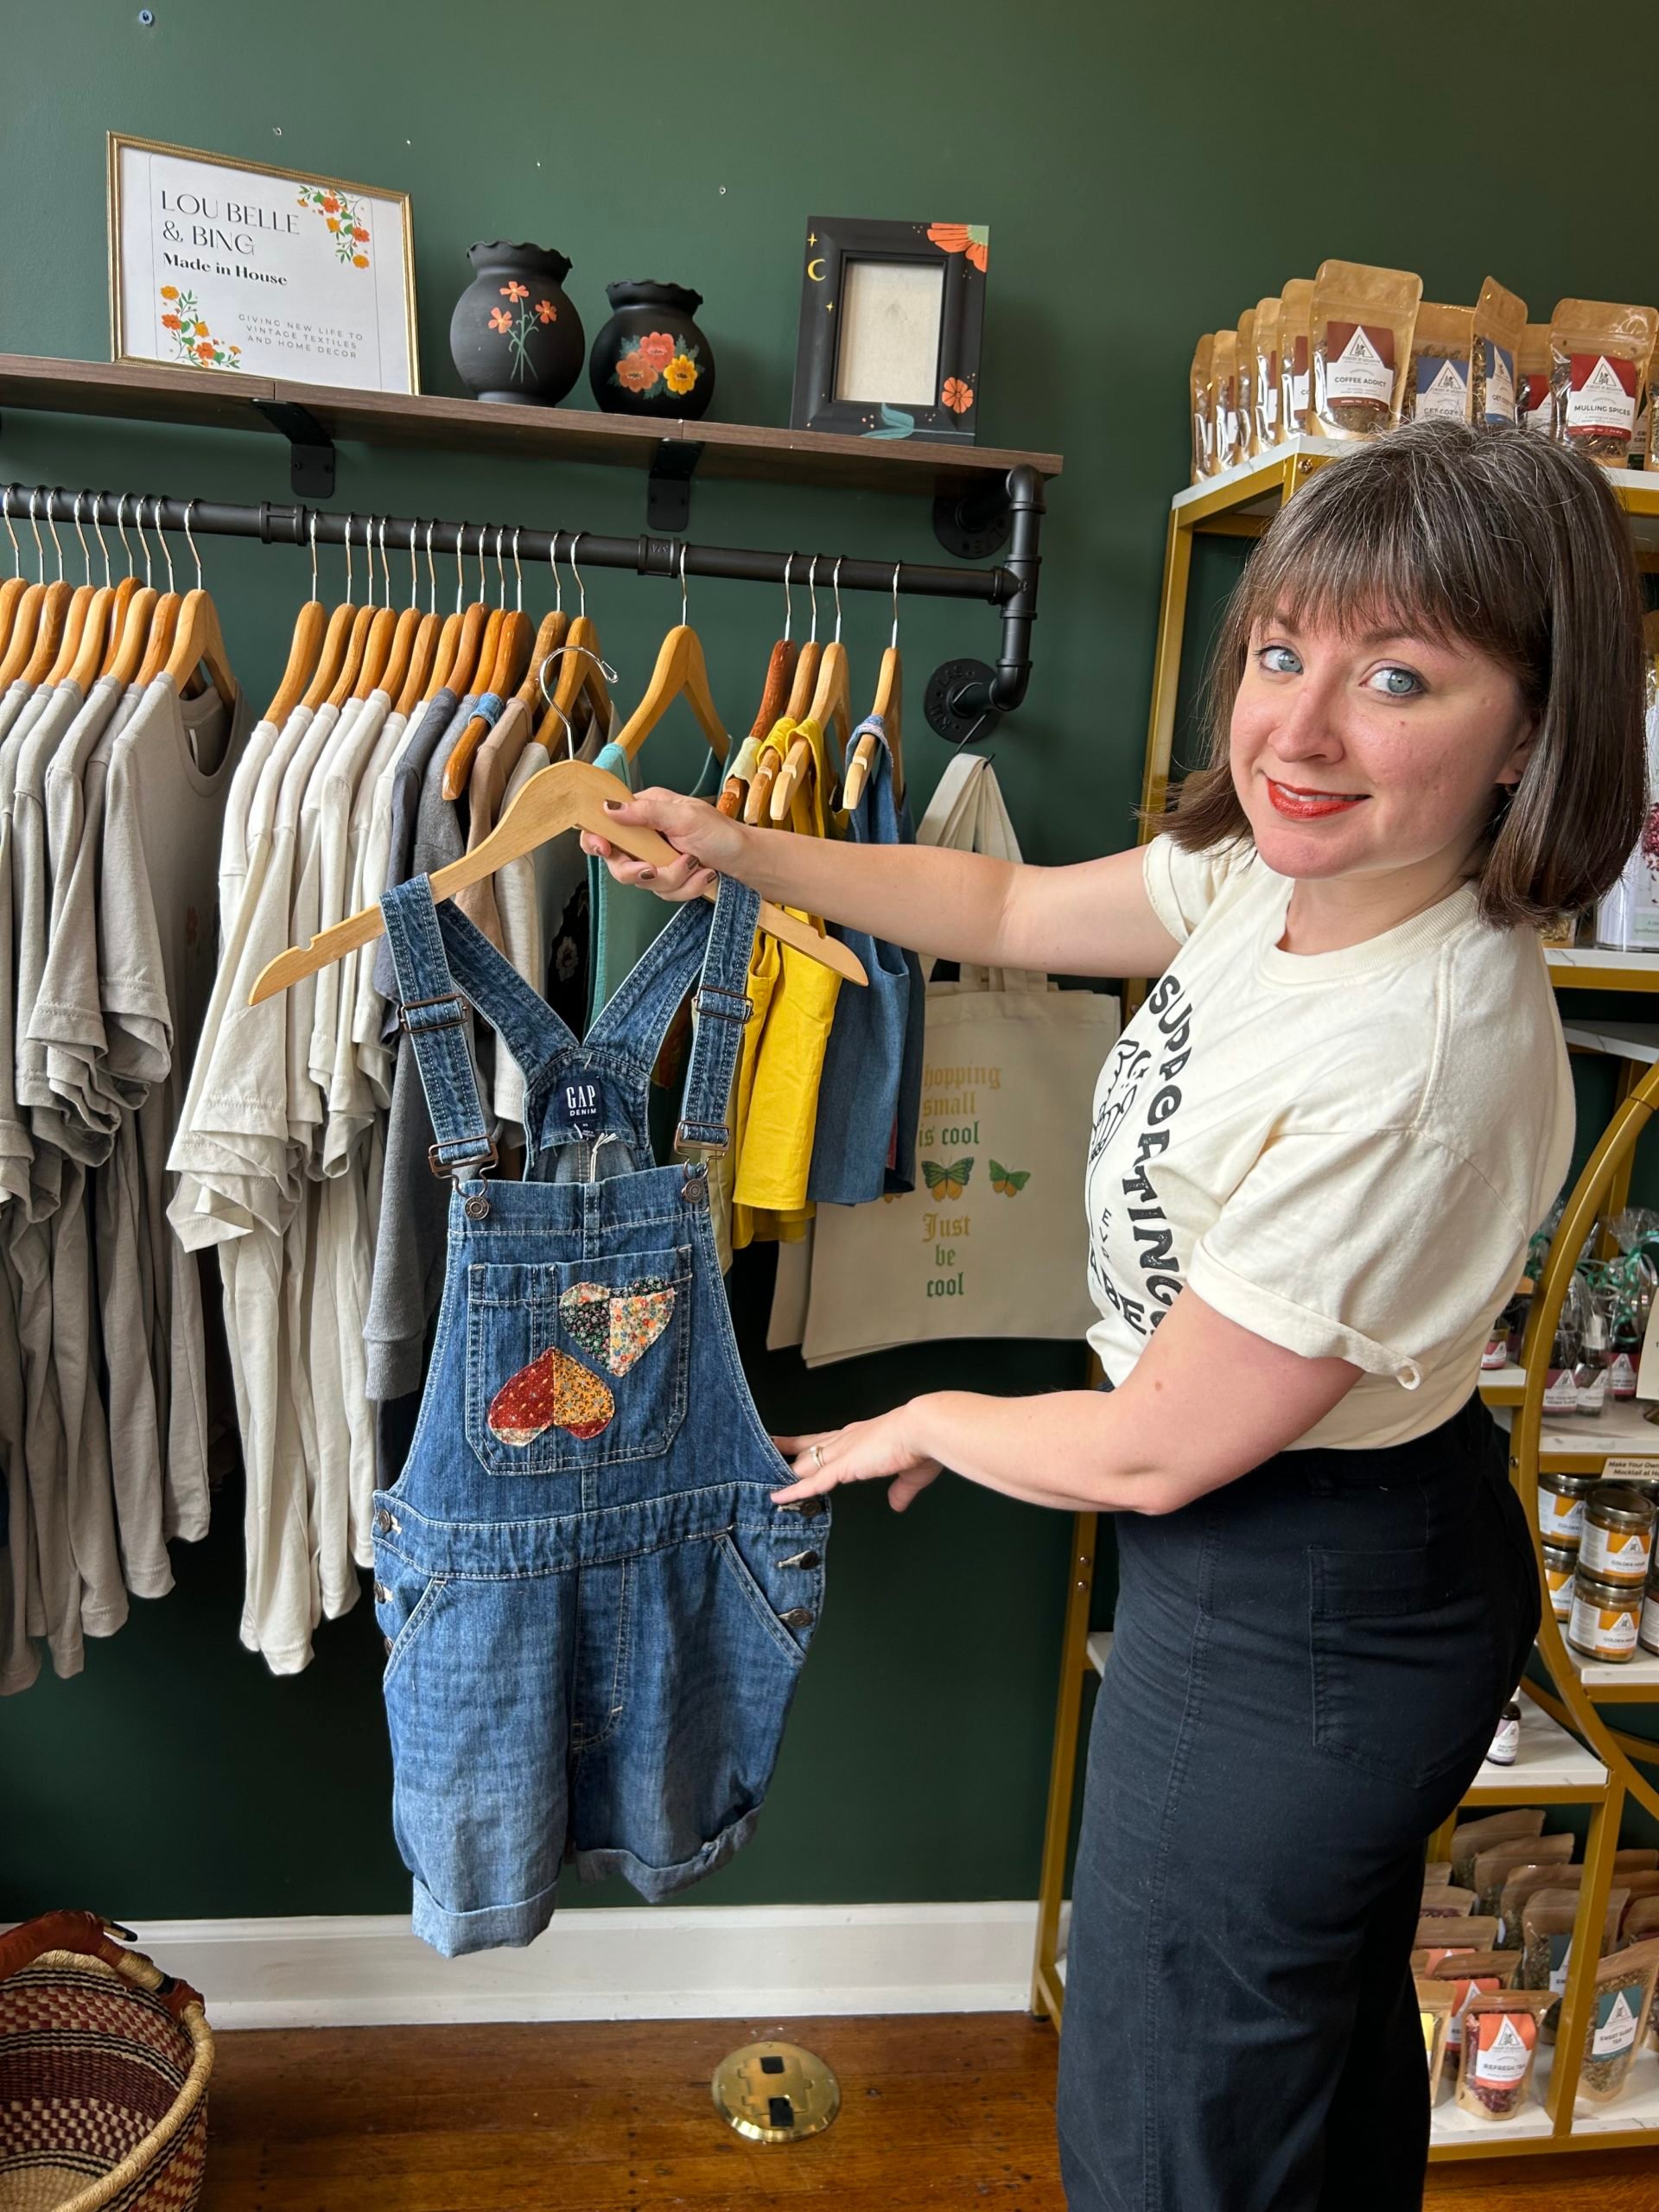 Lou Belle and Bing: Collinsville's Vintage Clothing Store & Boutique with Over 30 Local Vendors